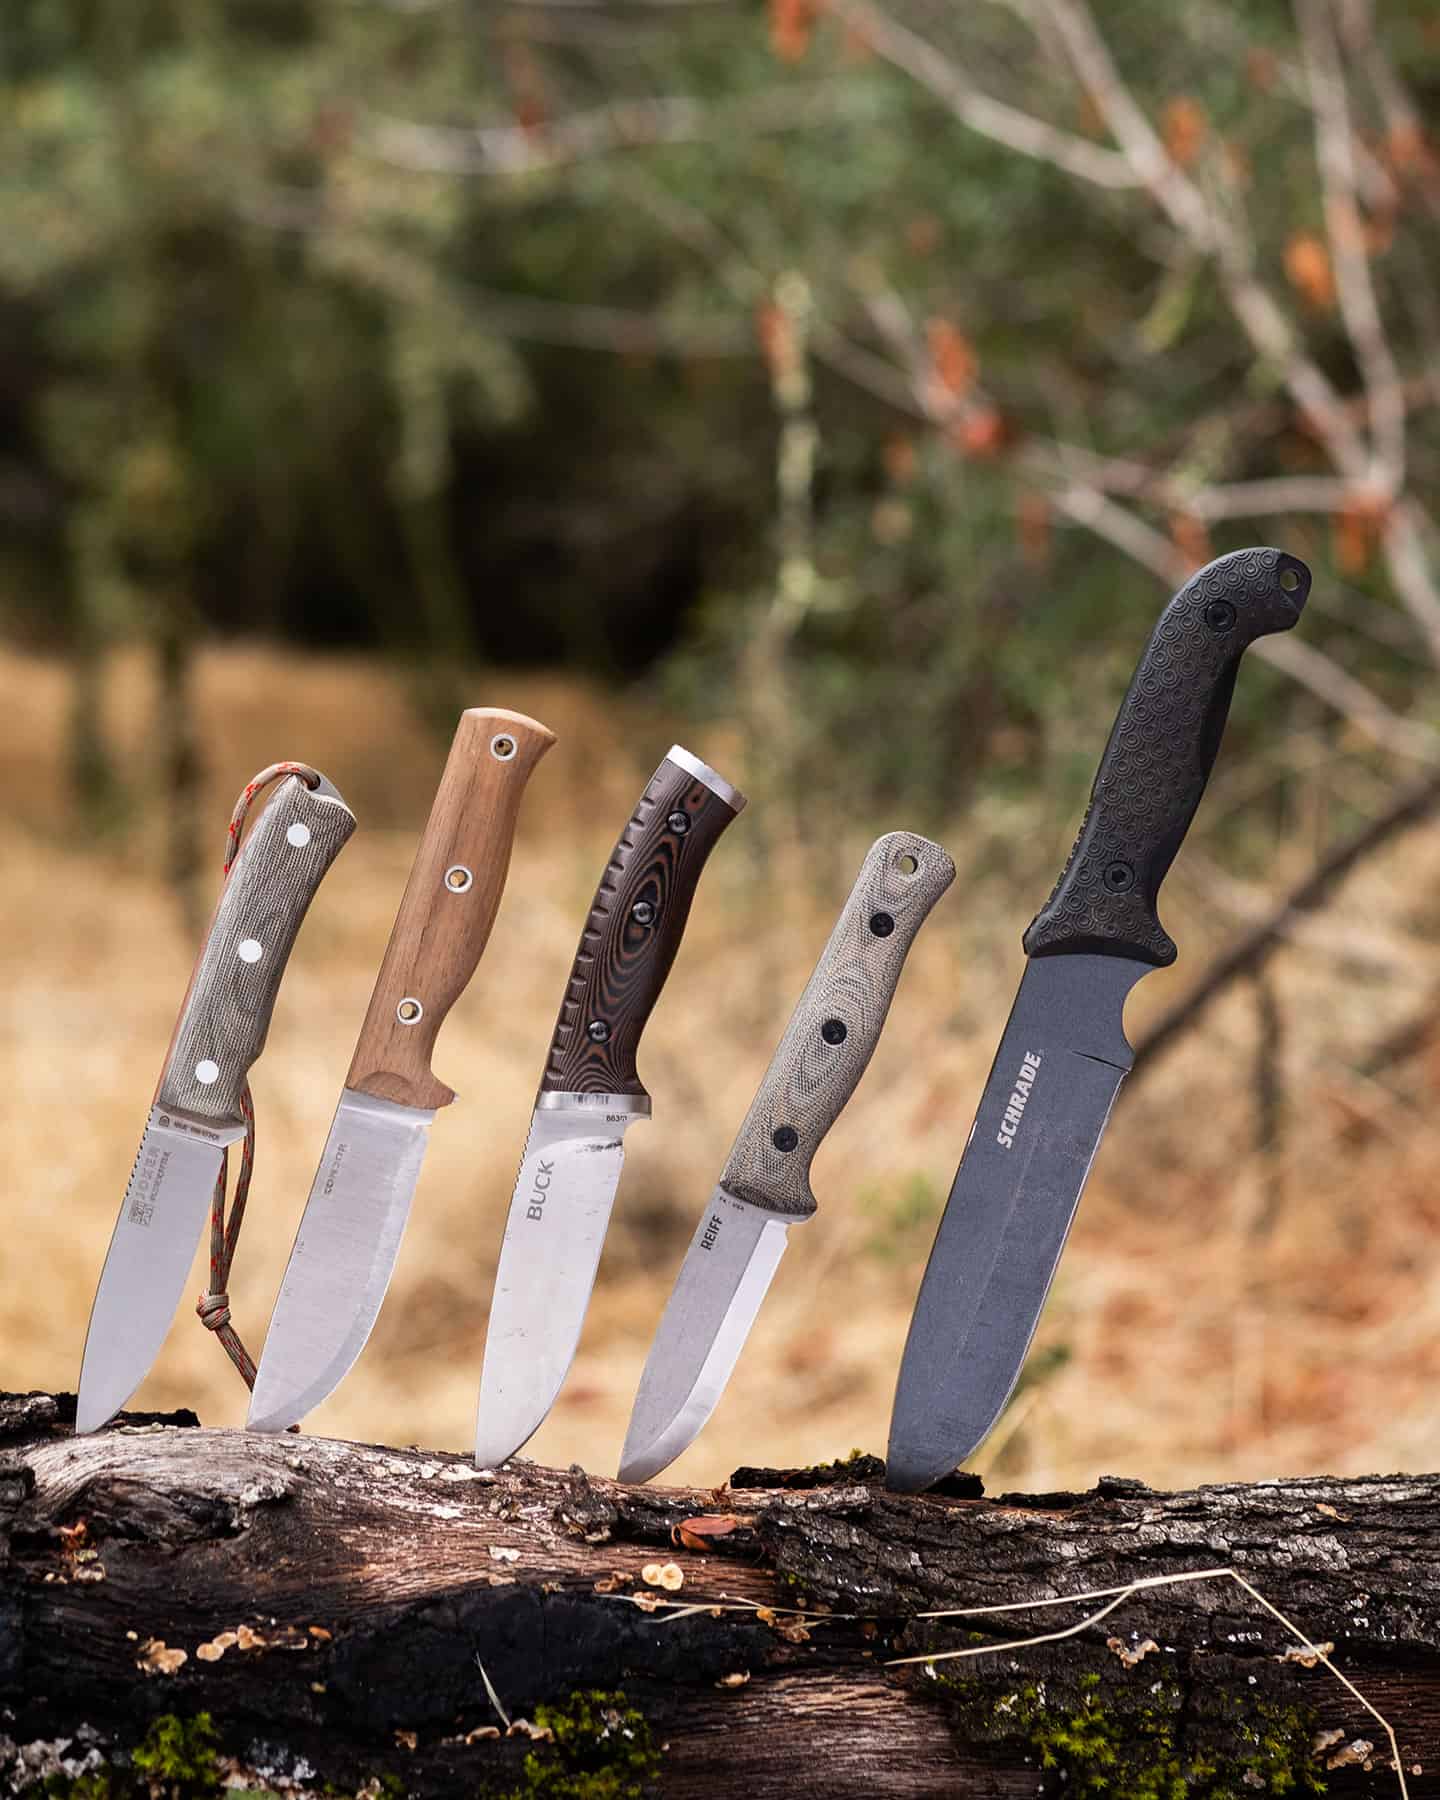 We tested dozens of bushcraft knives and picked the best ones at every price point.